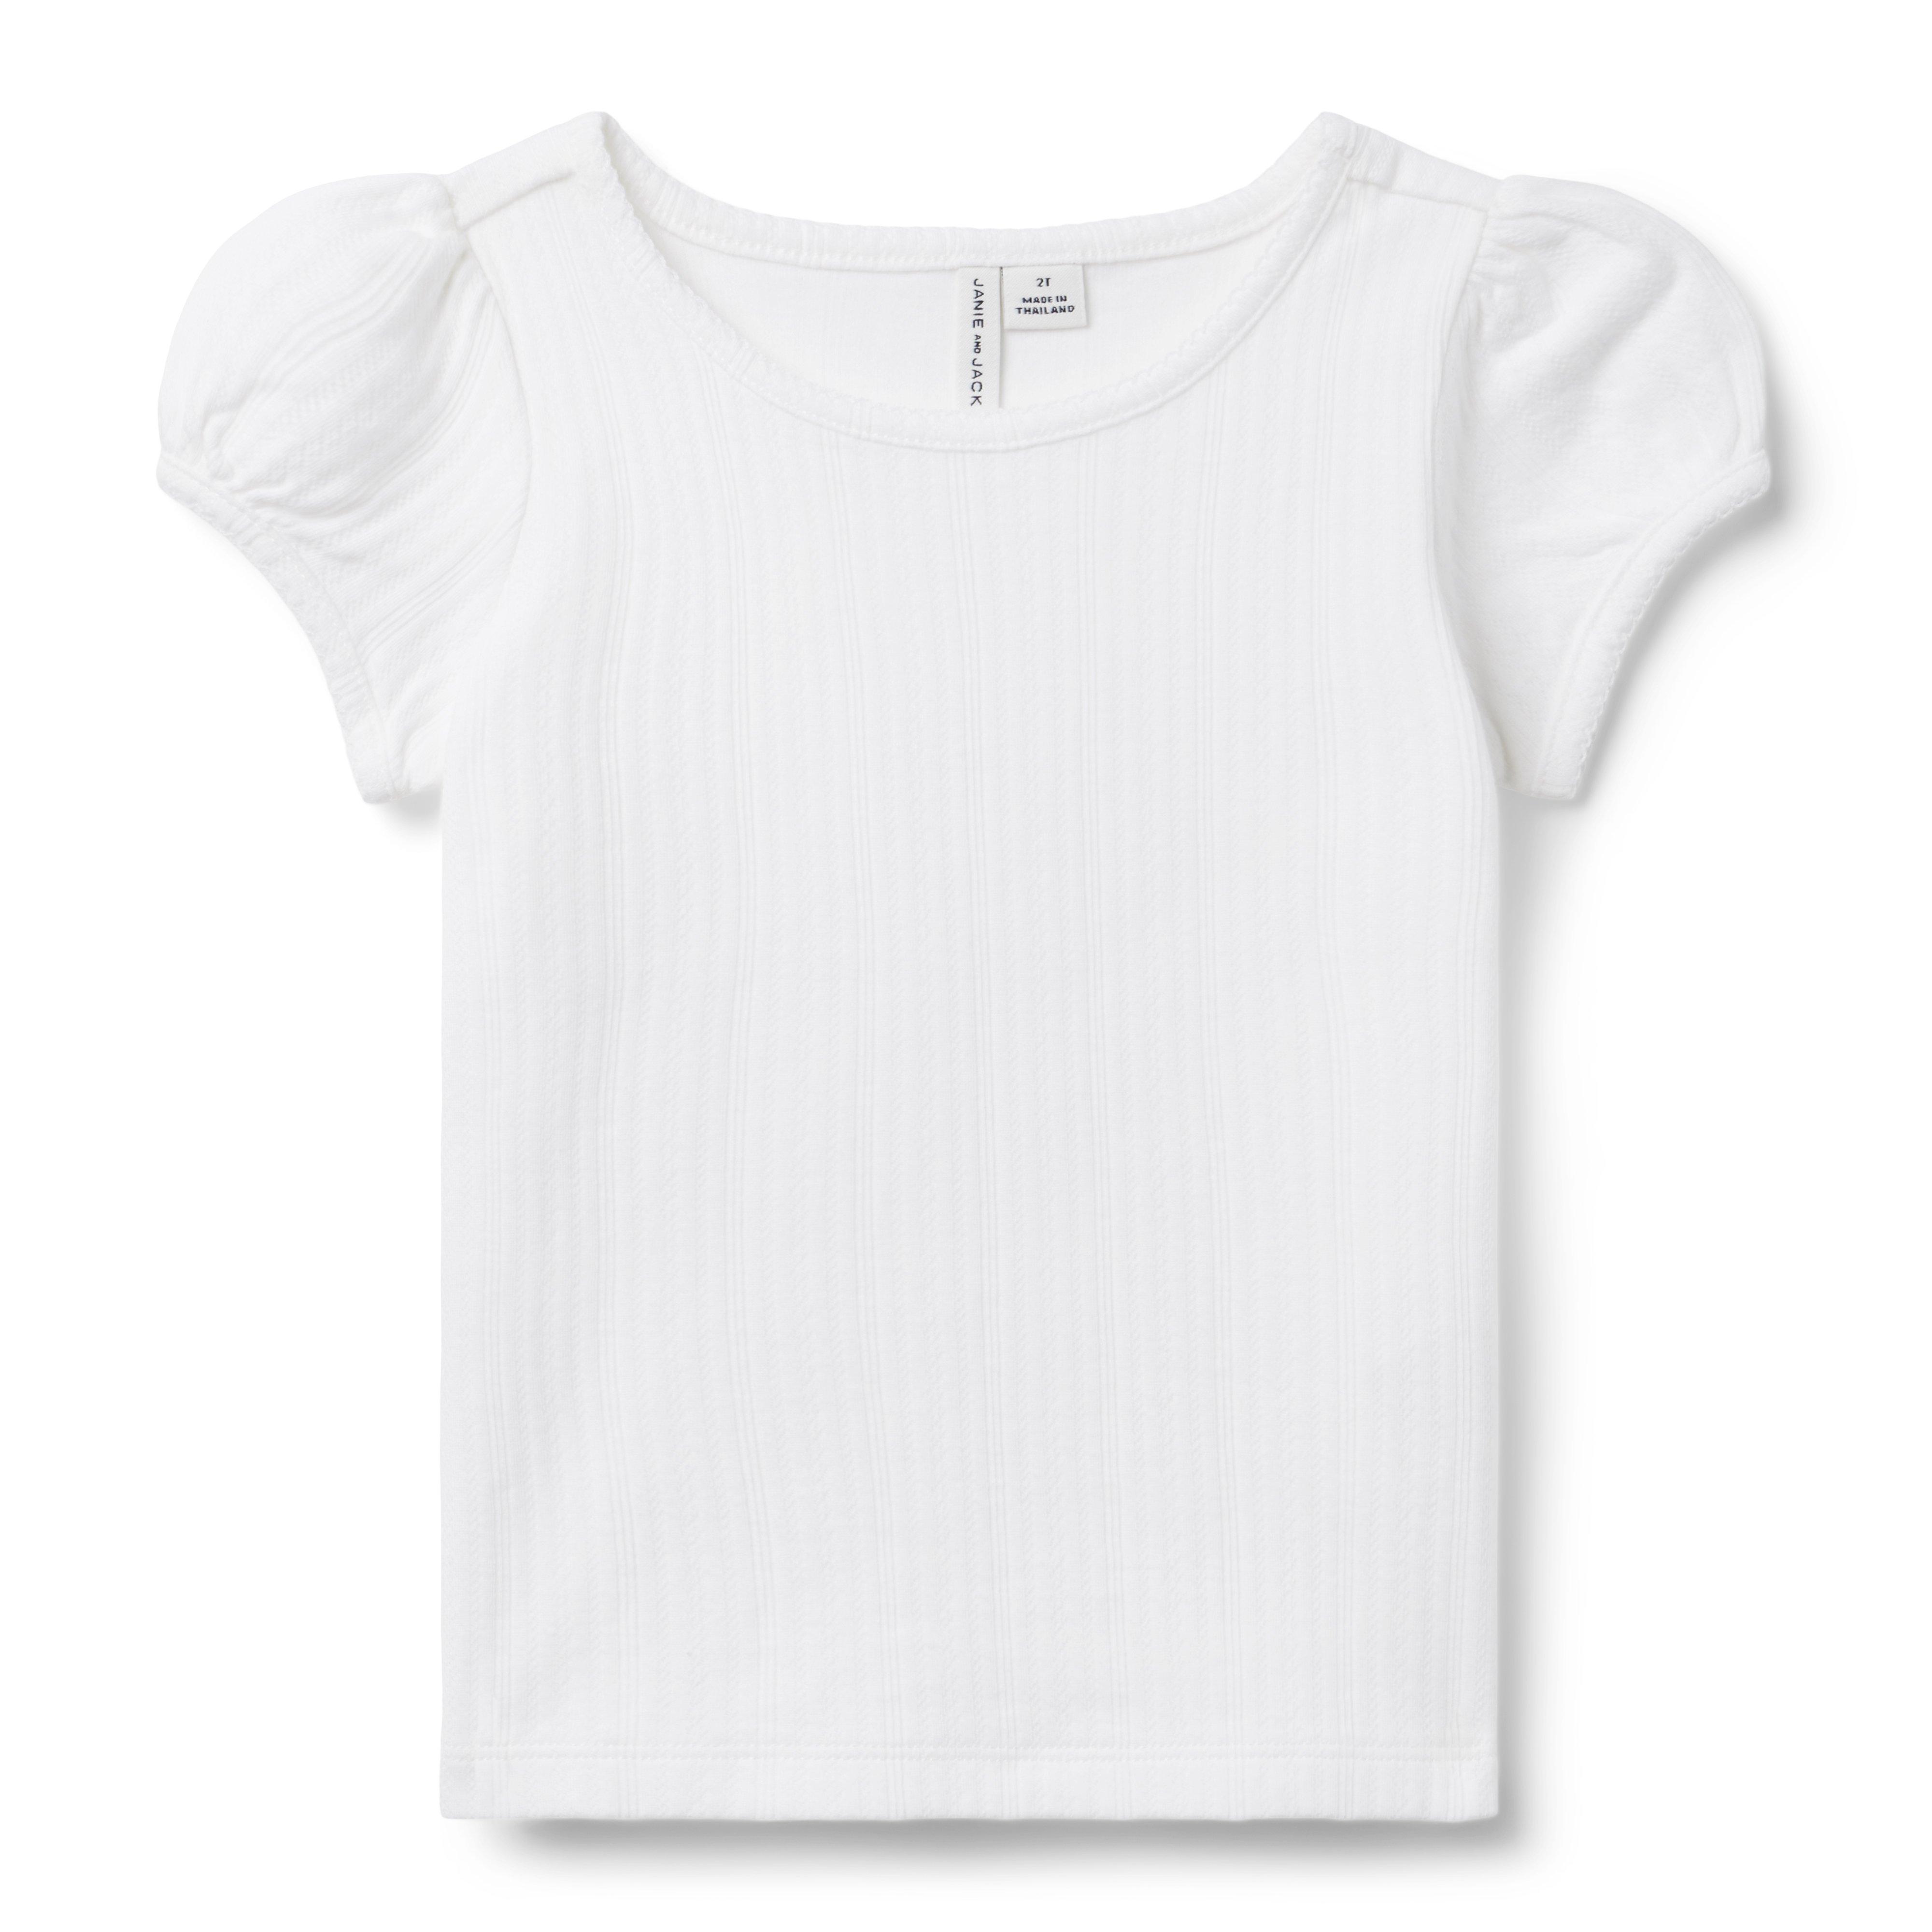 New Look pointelle button through shirt in off white